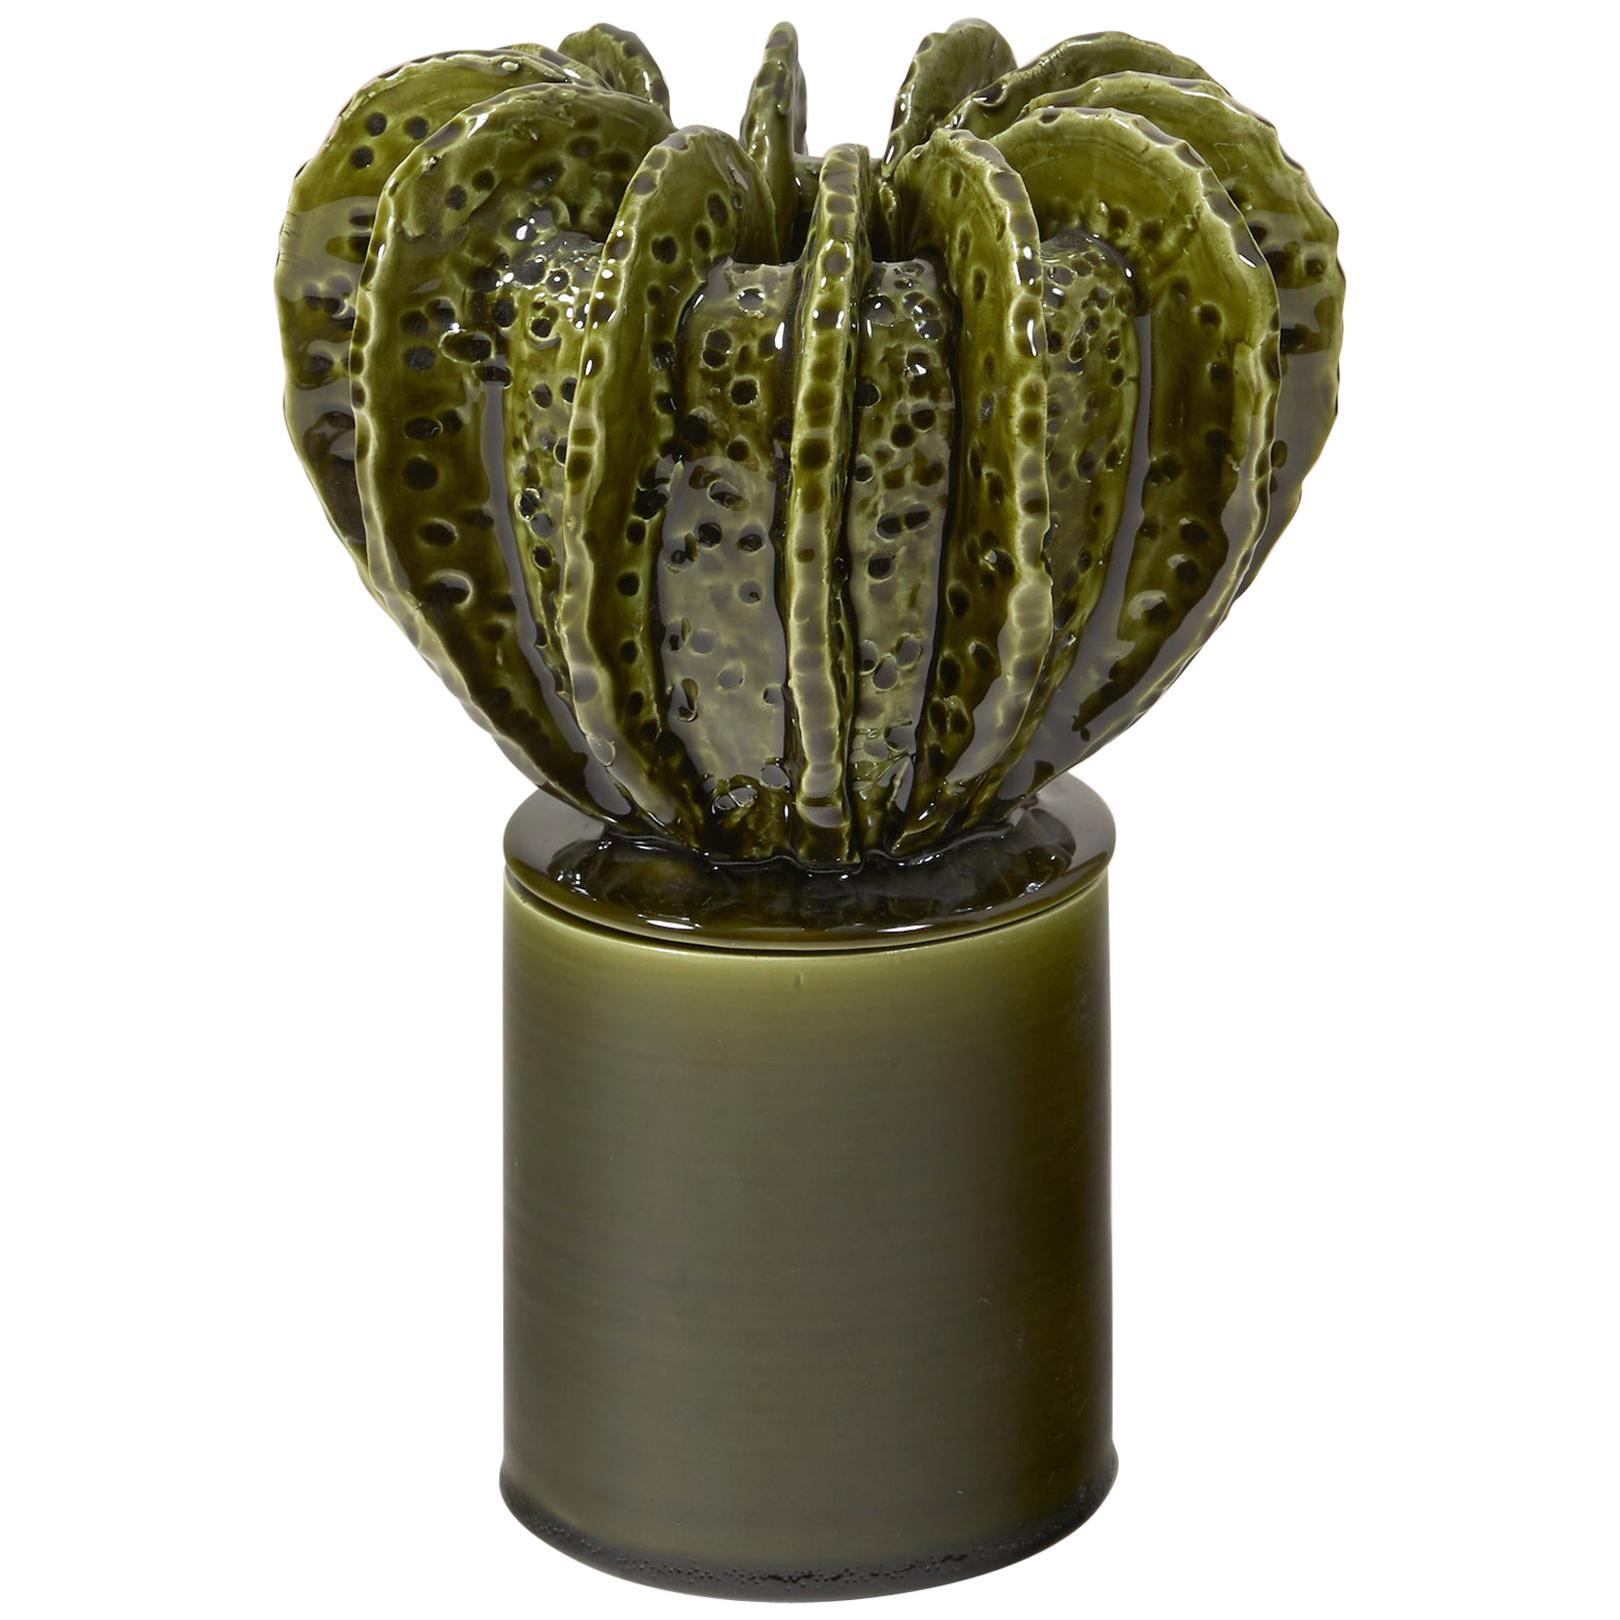 Glazed Green Medium Candleholder with Sculpted Lid by Laura Gonzalez